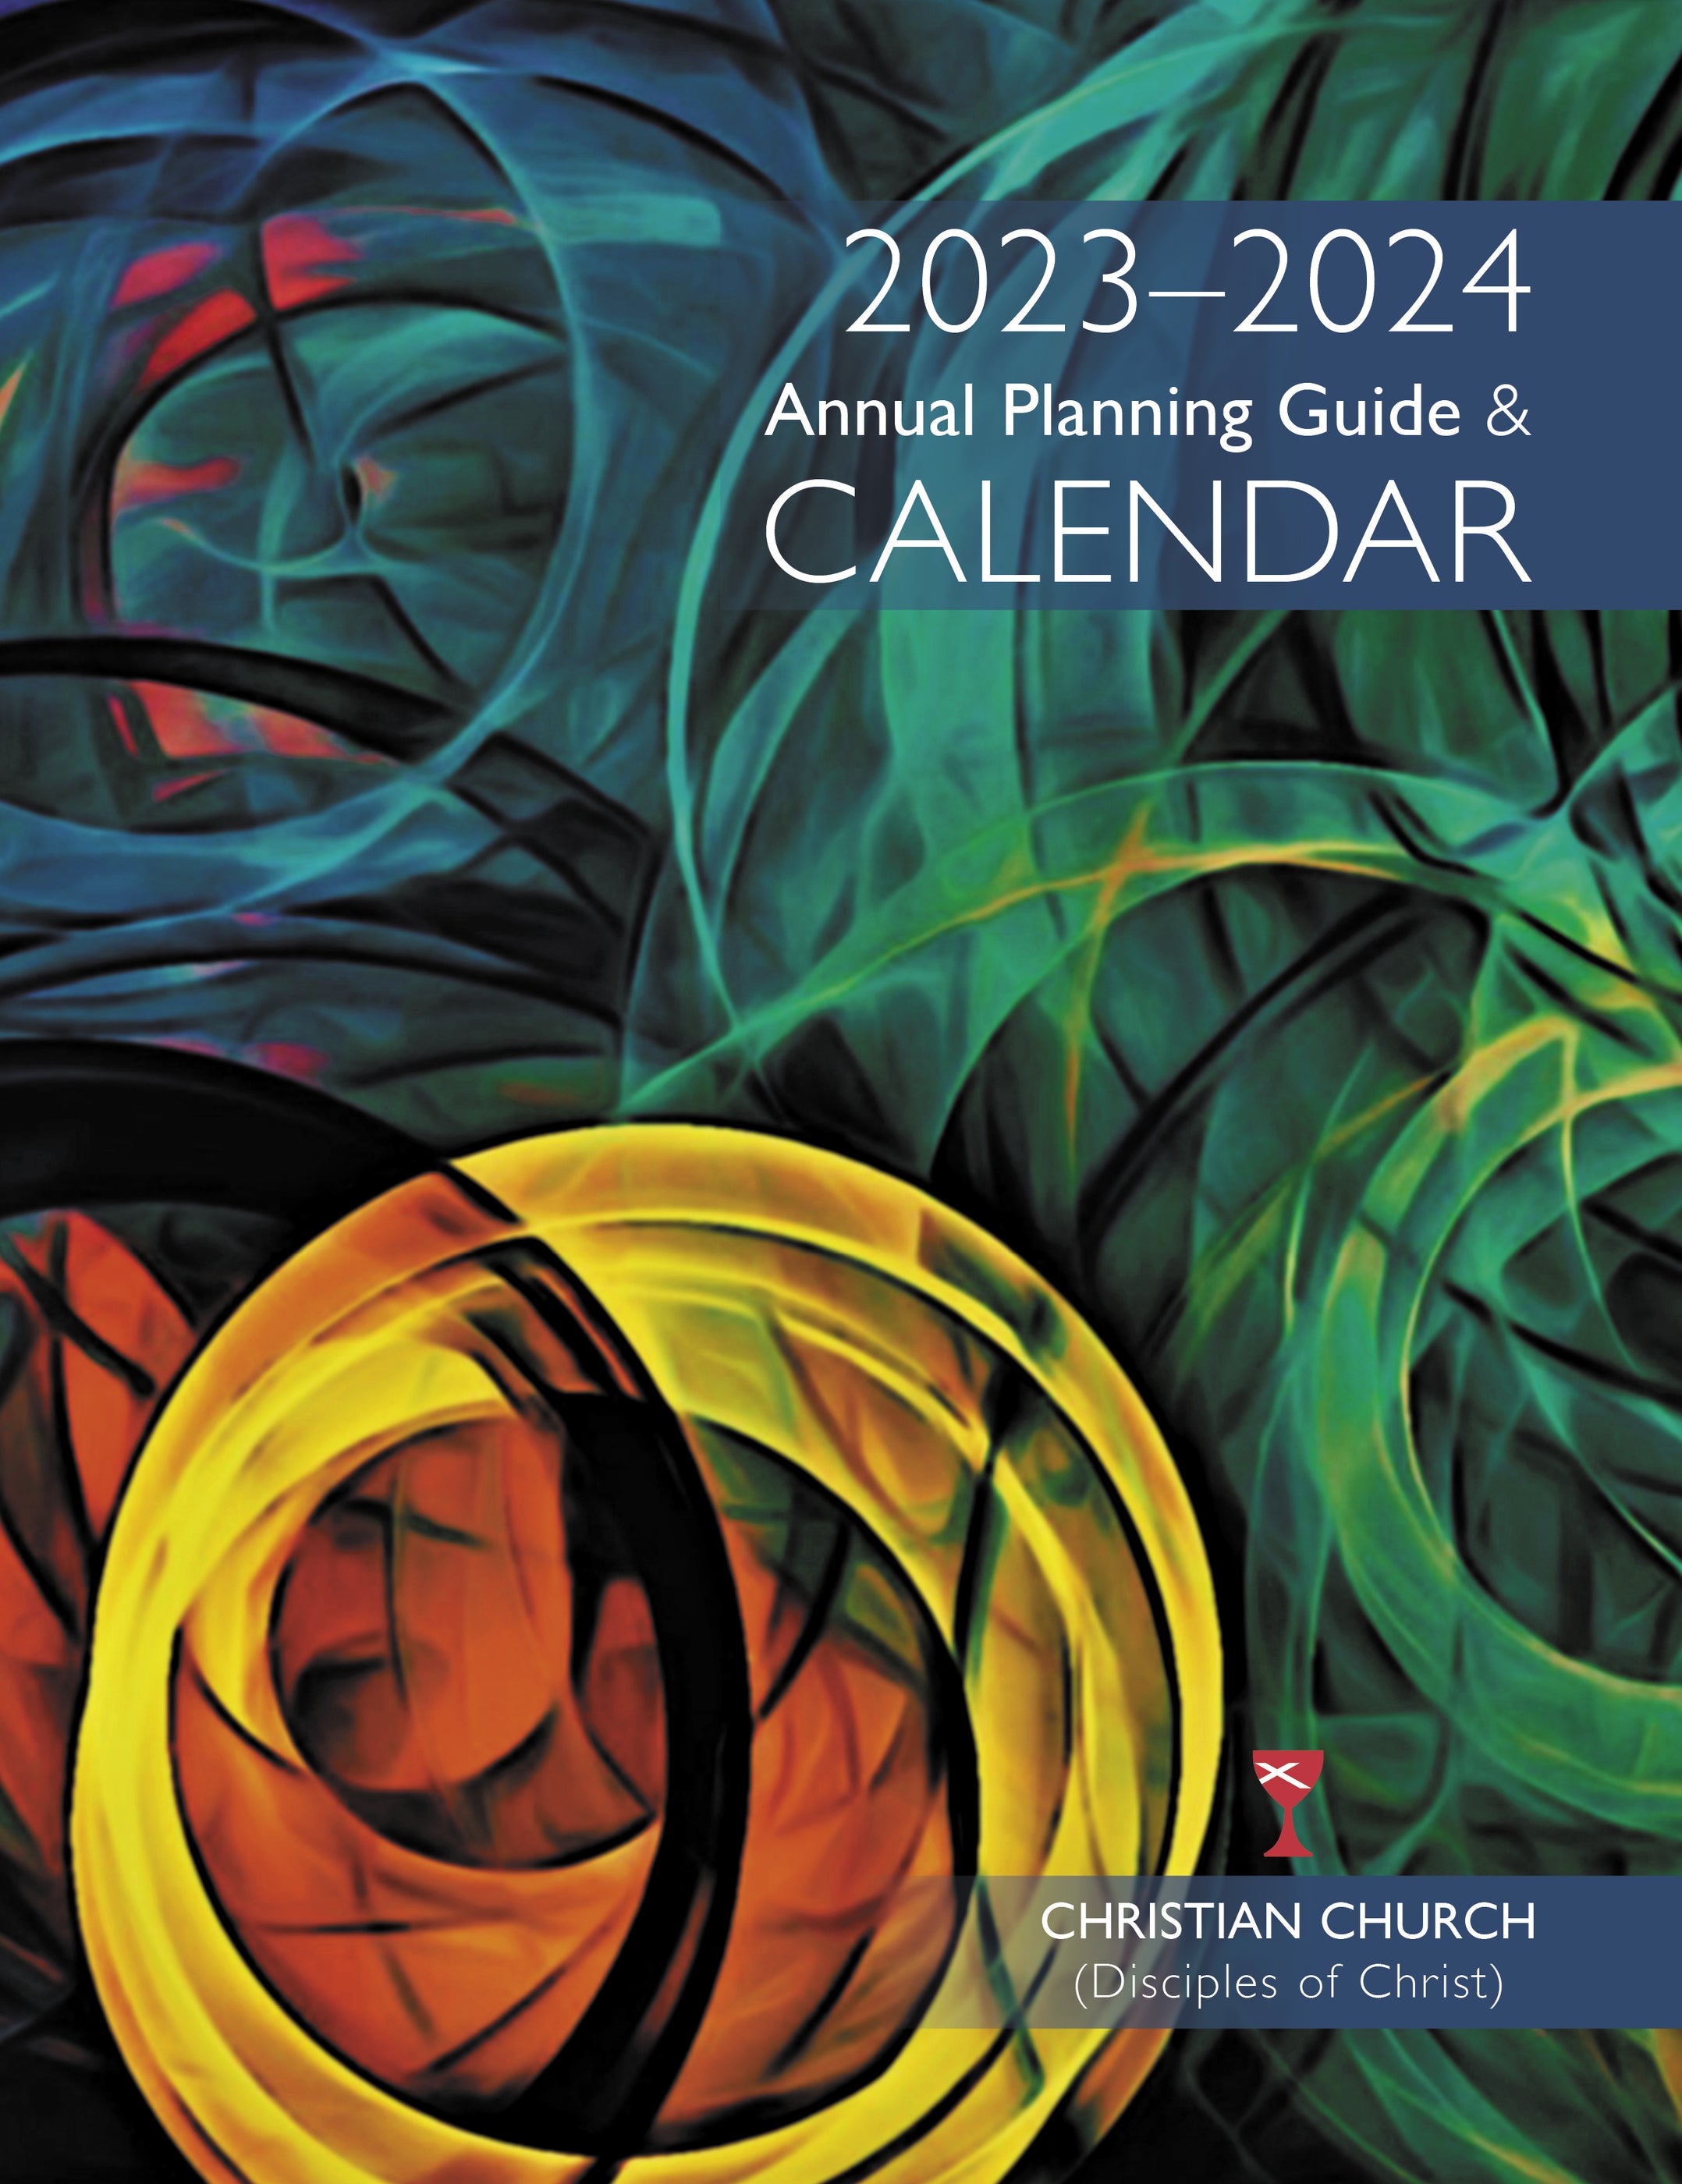 Annual Planning Guide & Calendar 2023-2024 — Chalice Press